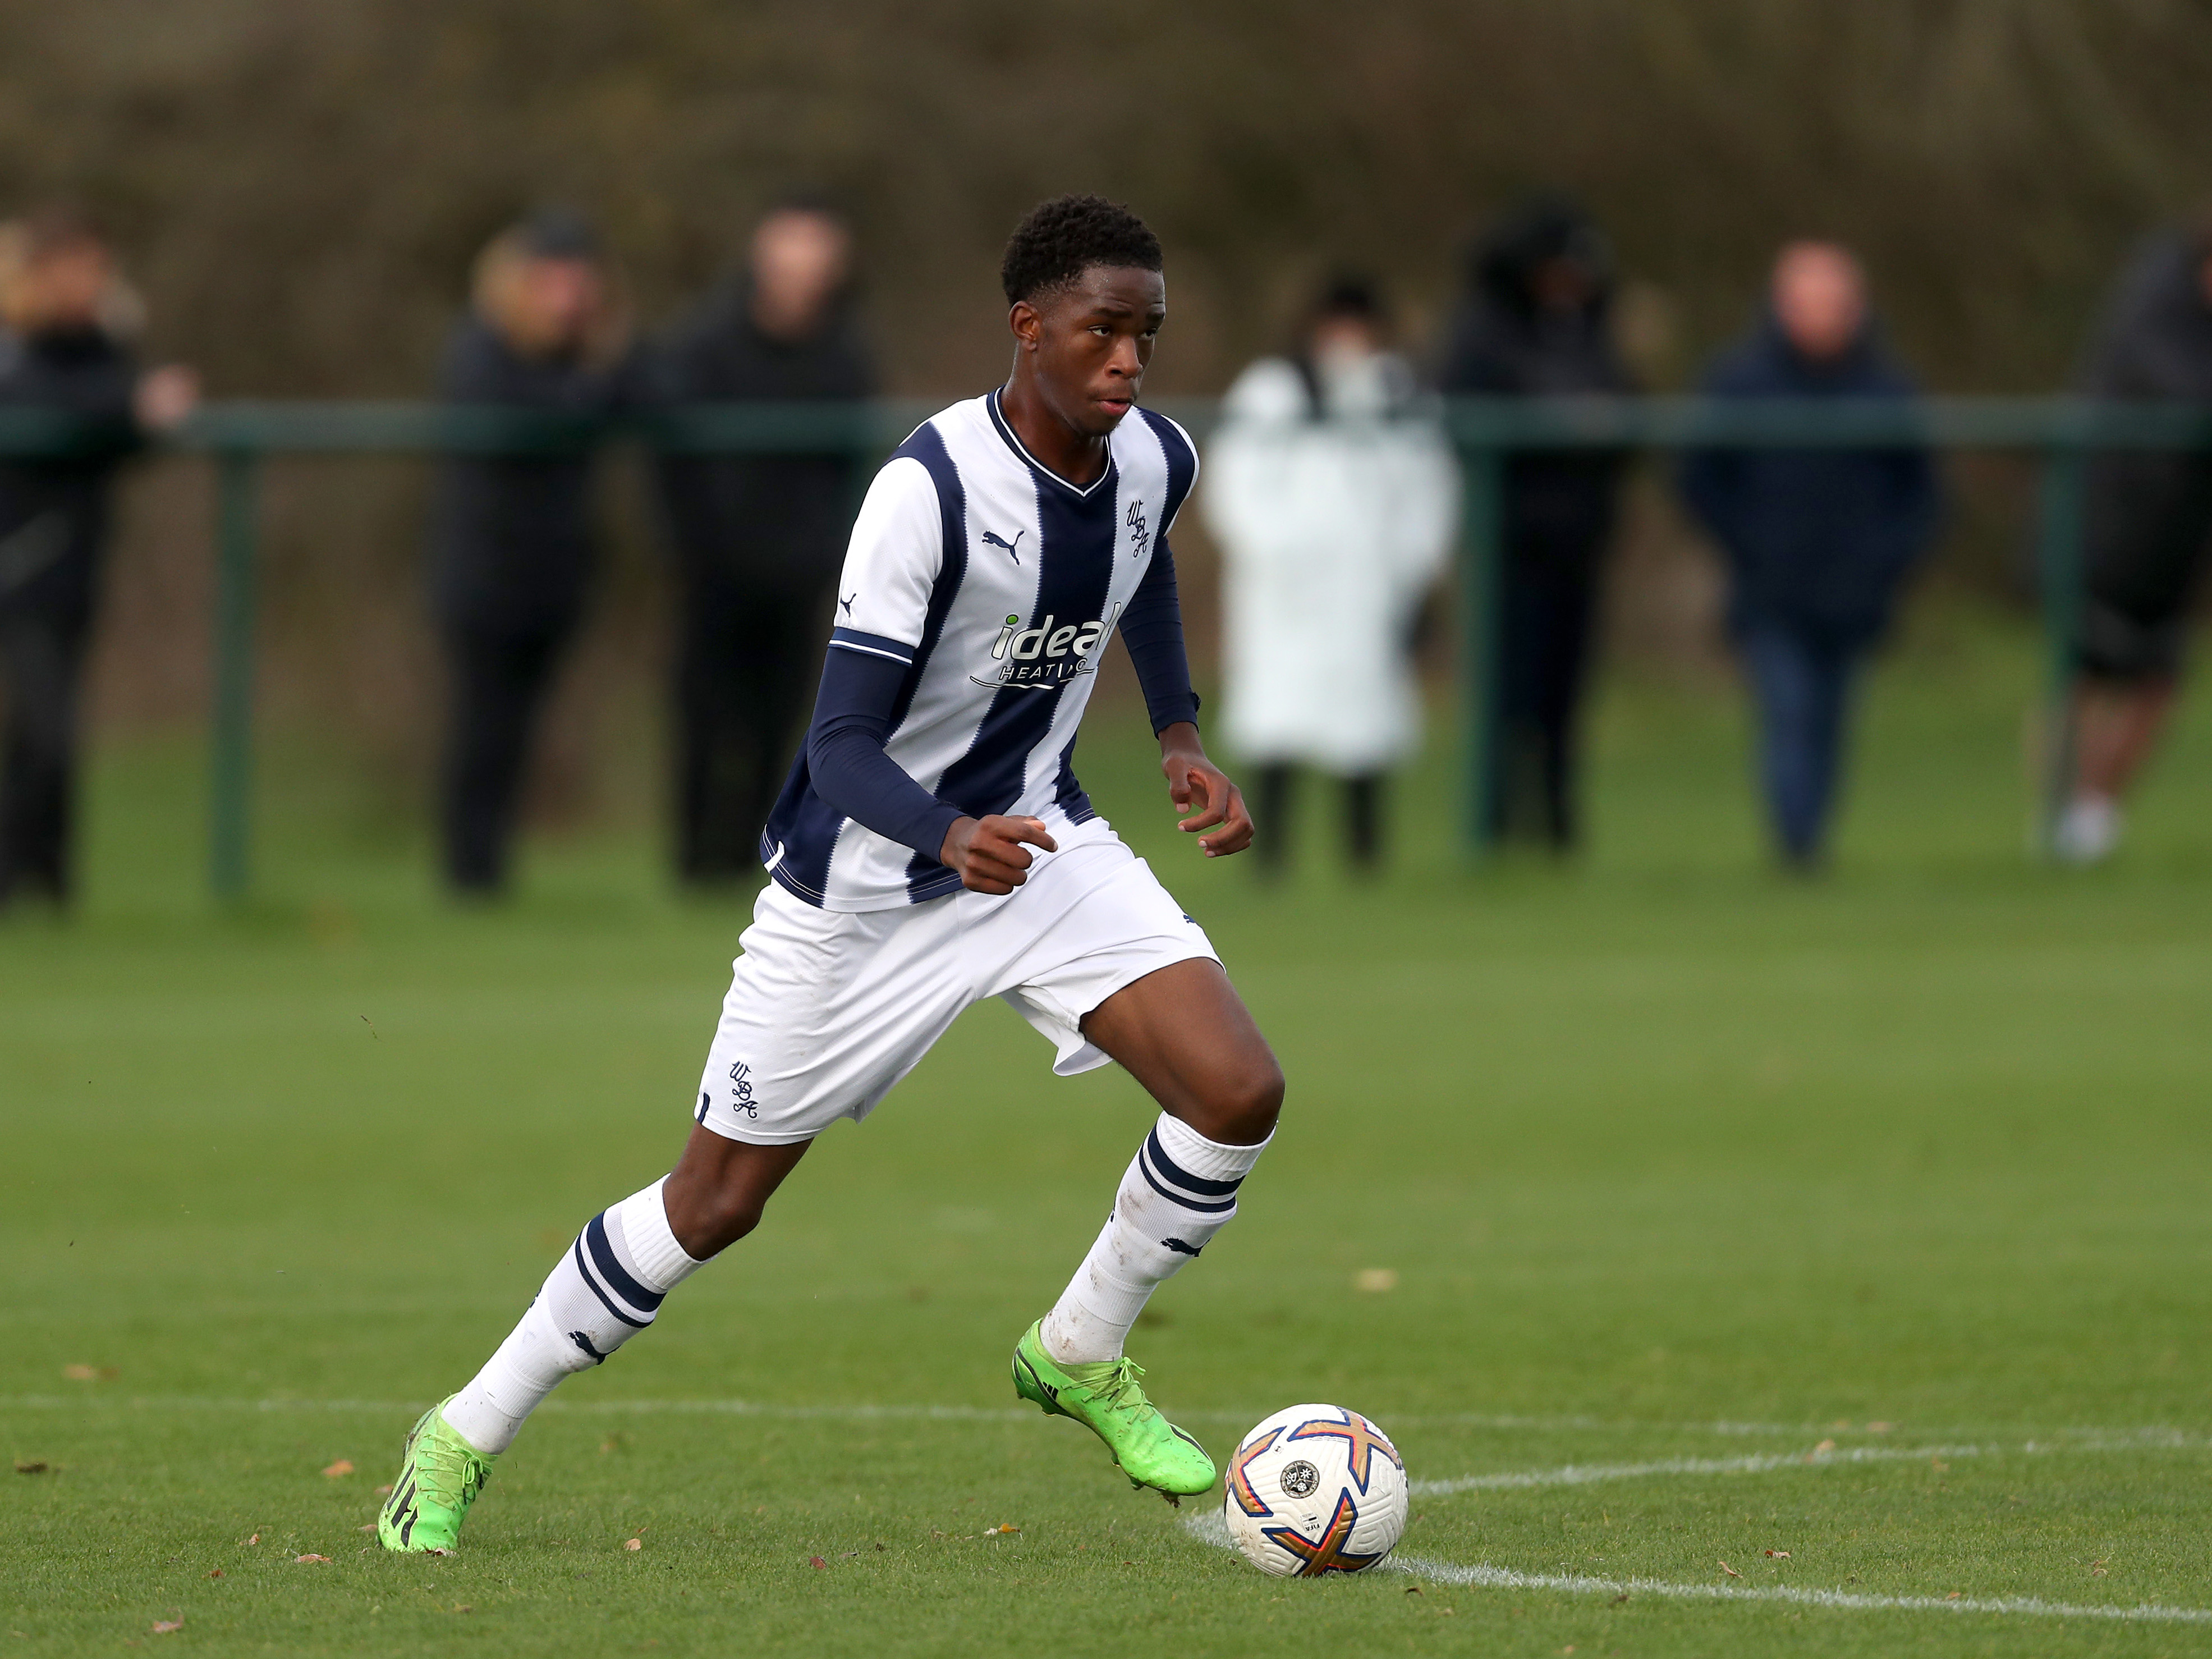 U18s midfielder Kevin Mfuamba in action for Albion against Leicester City